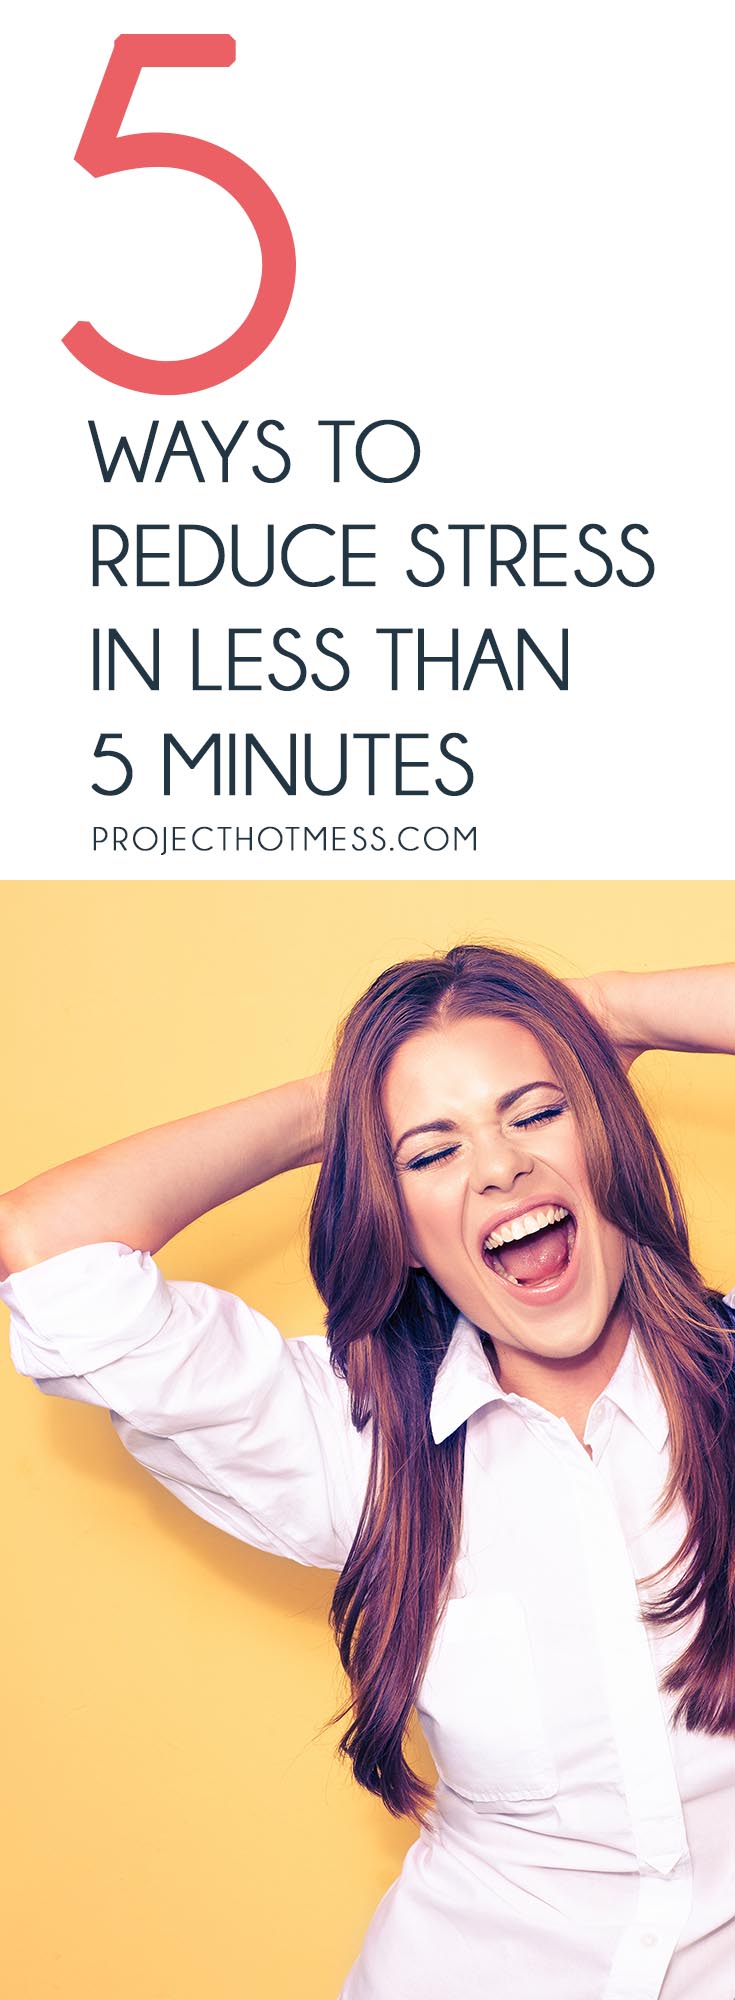 Stress is part of our everyday lives, but we are in such high states of overdrive we don't even realise it. Use these 5 ways to reduce stress in less than 5 minutes to help you feel amazing. 